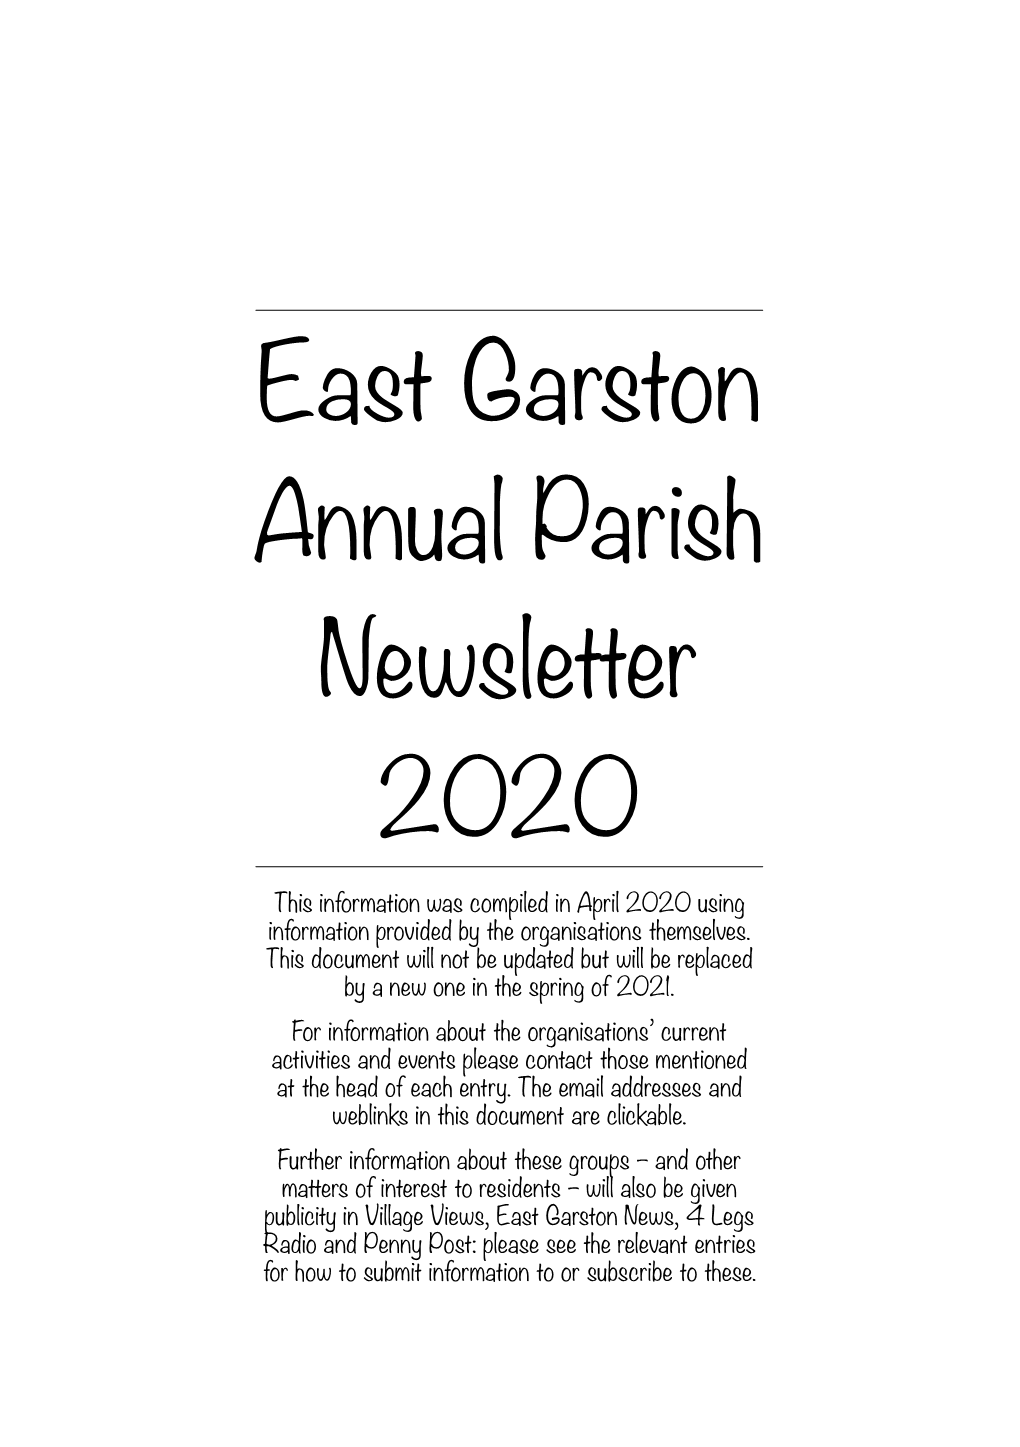 East Garston Annual Parish Newsletter 2020 This Information Was Compiled in April 2020 Using Information Provided by the Organisations Themselves